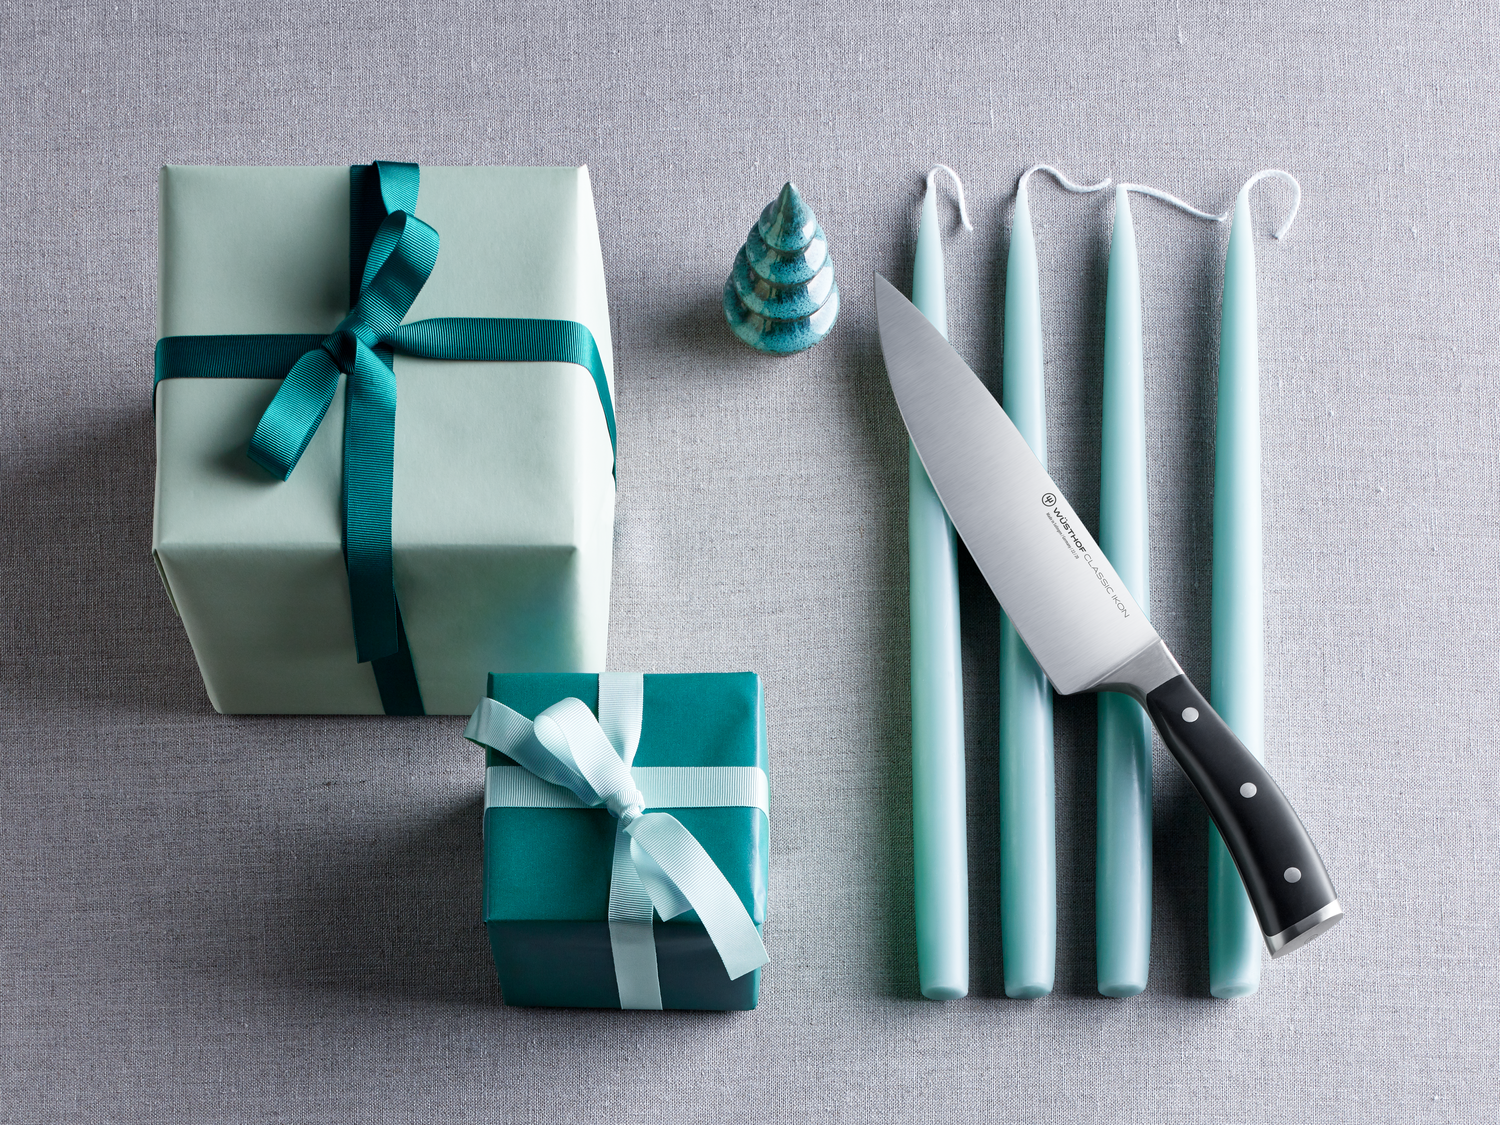 WÜSTHOF Classic Ikon Chef's Knife with gifts and holiday decor